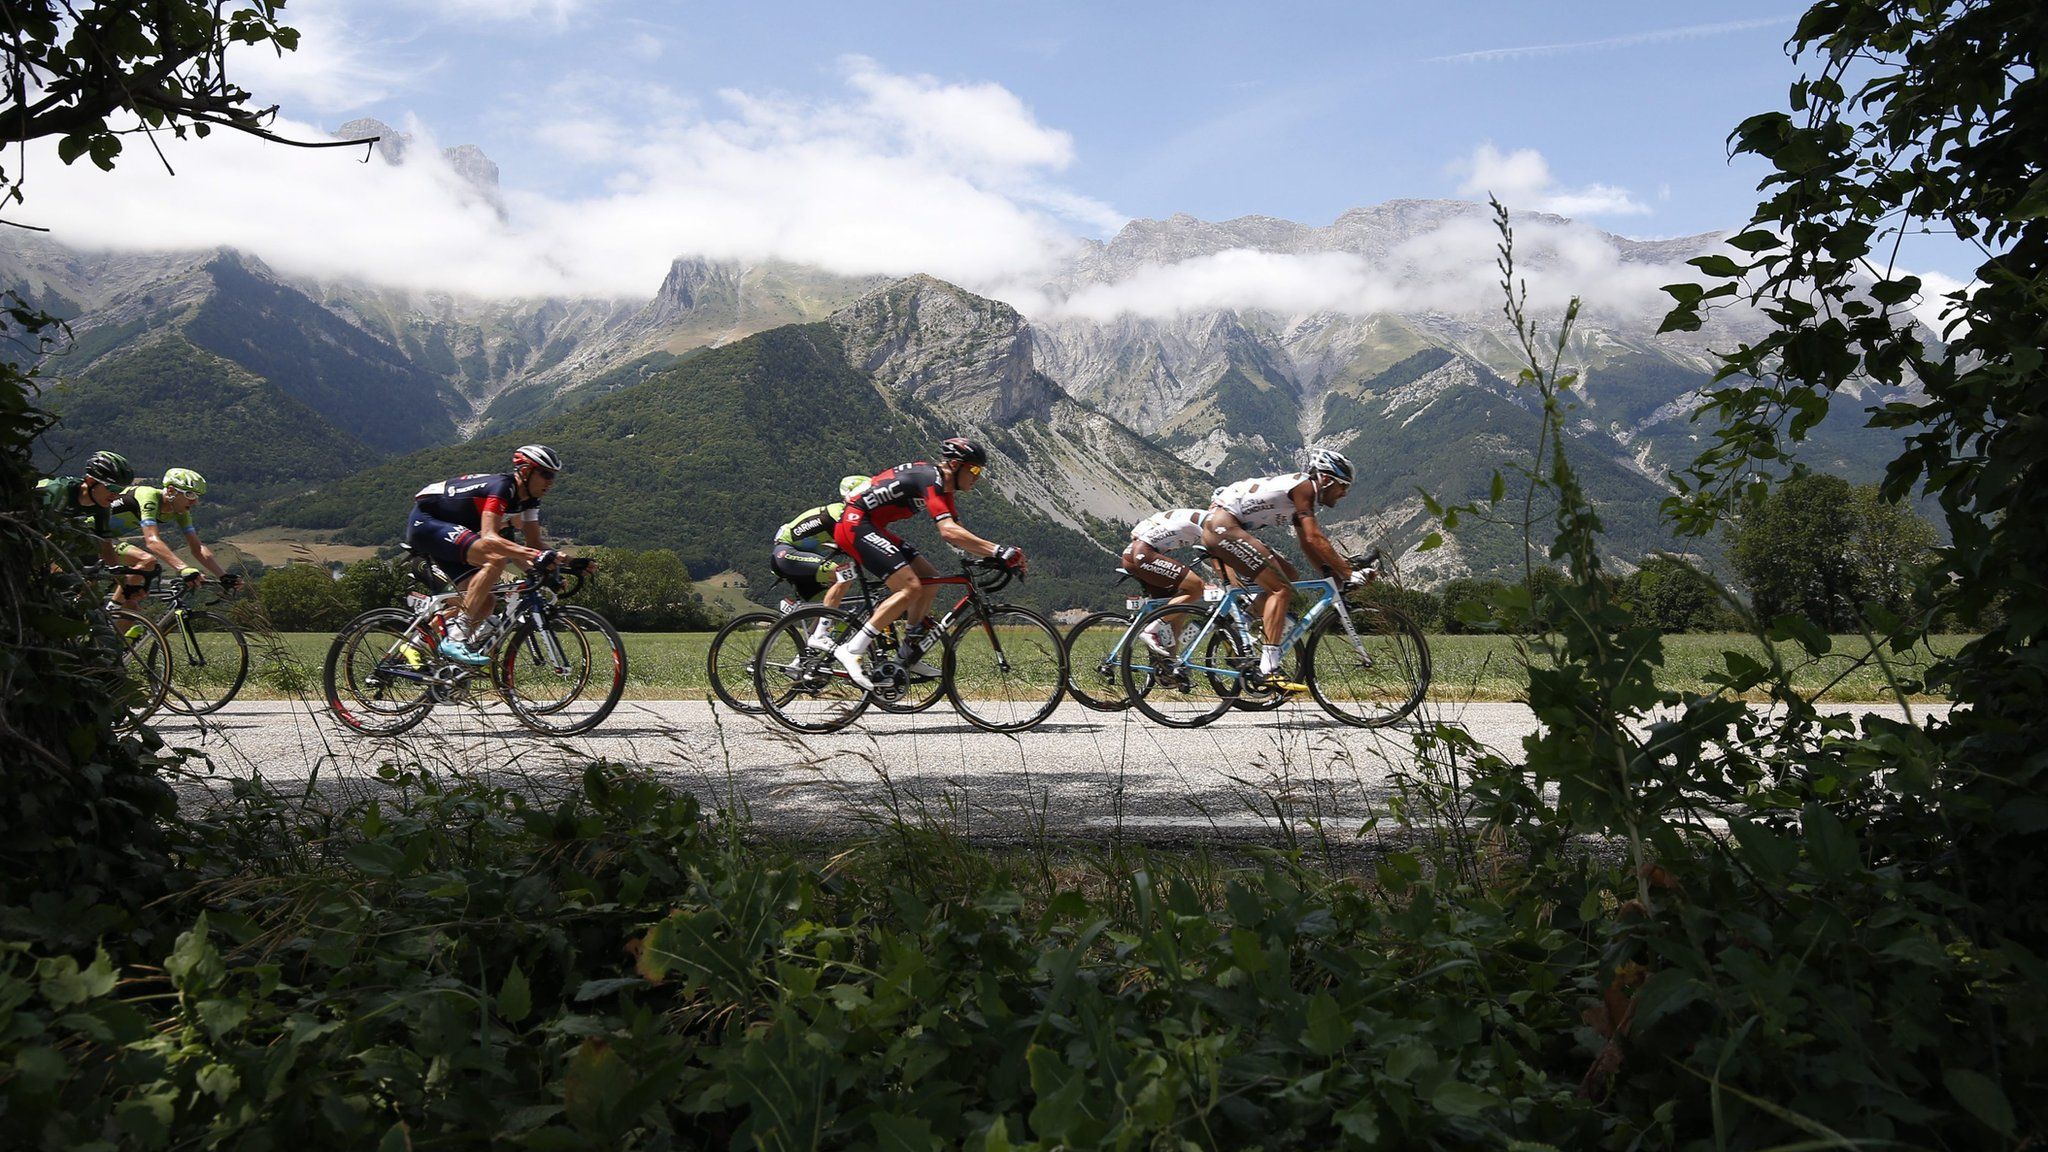 Cyclists in the Alpines